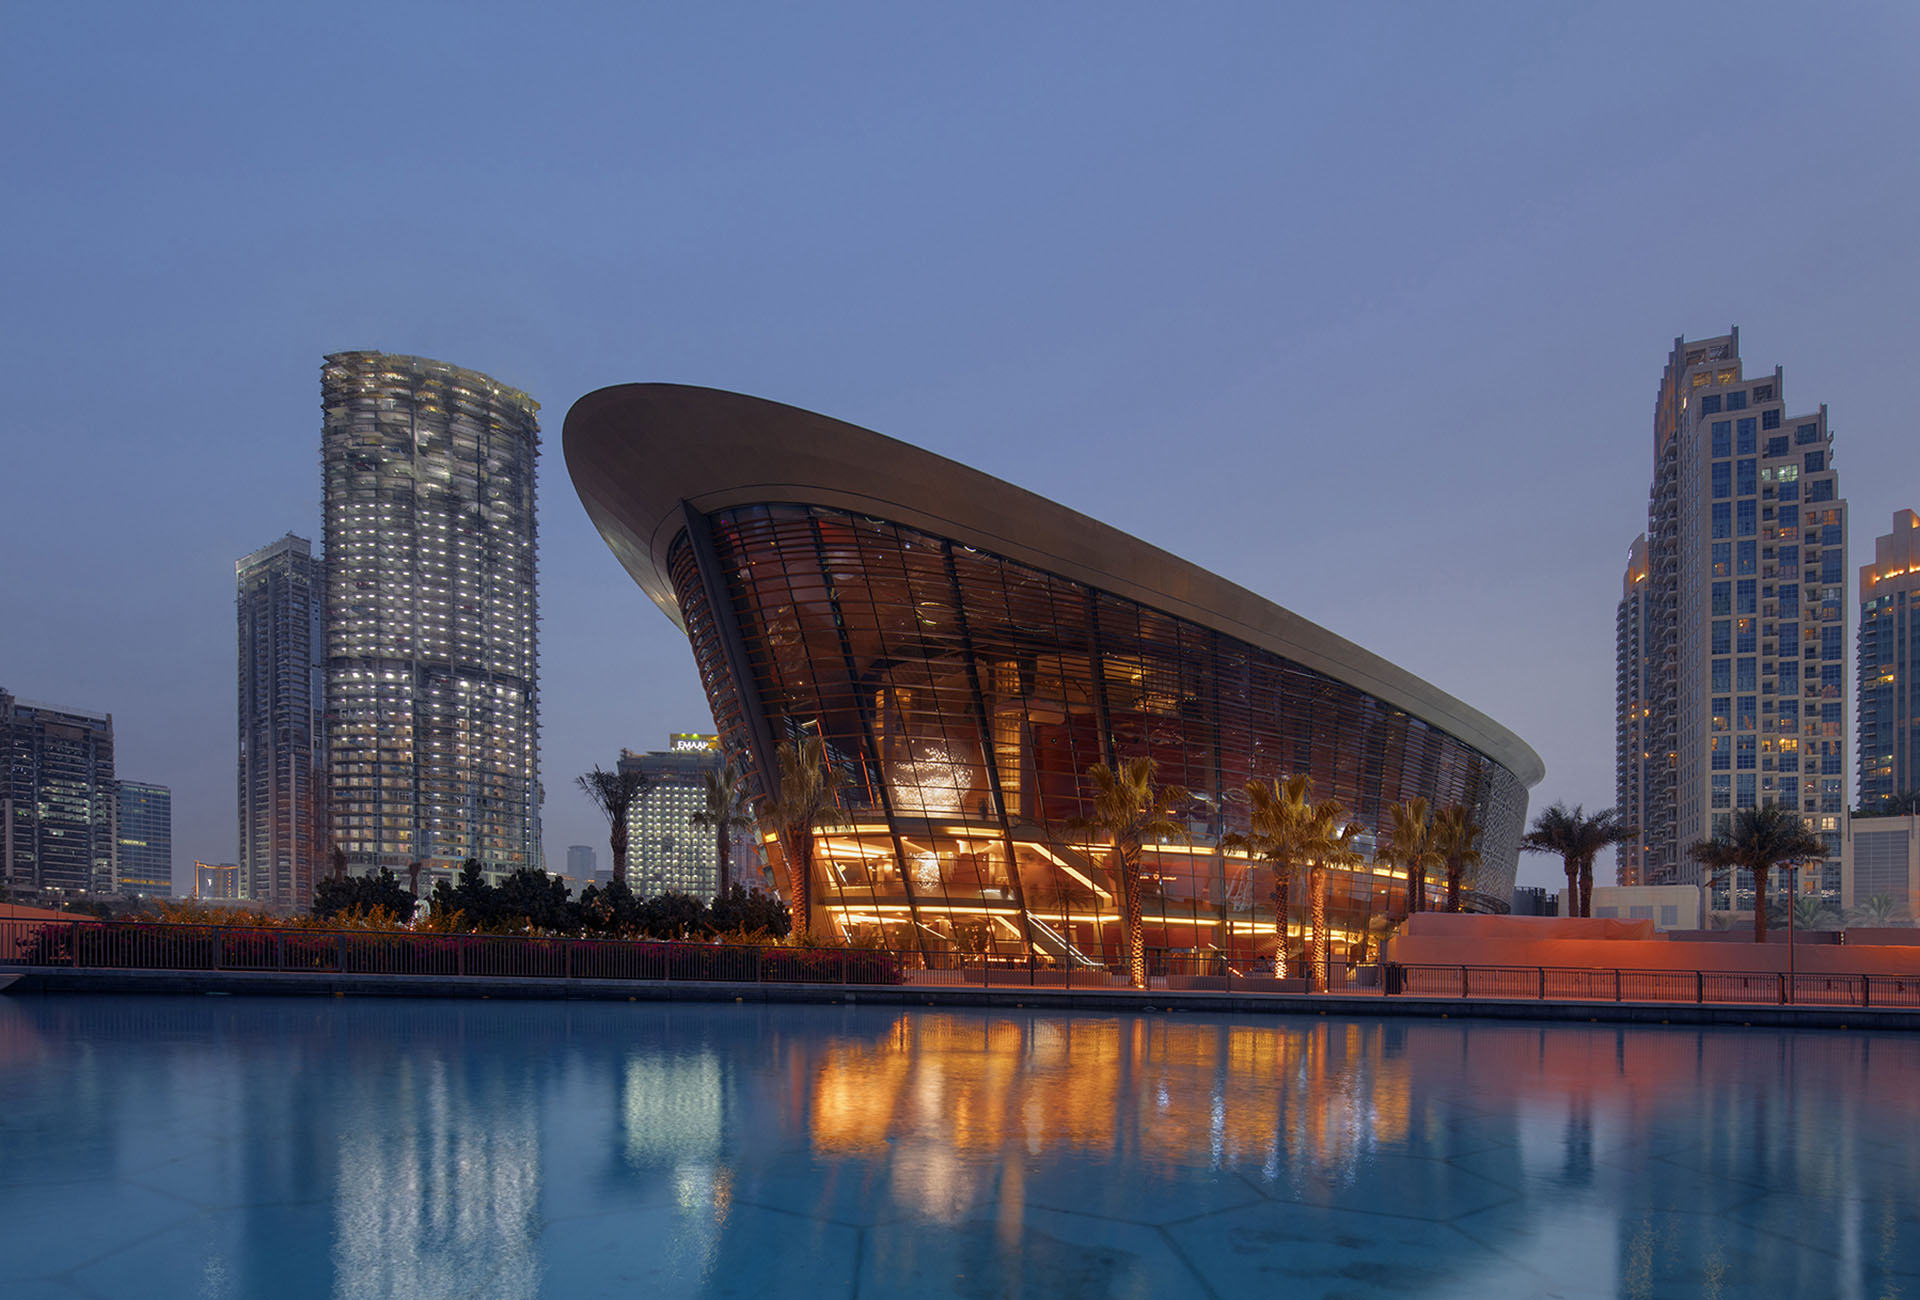 <p>Inspired by Dubai’s maritime history, the new Dubai Opera is an iconic and sophisticated facility that will become the heart of the cultural district in Emaar’s prestigious Downtown development.</p>